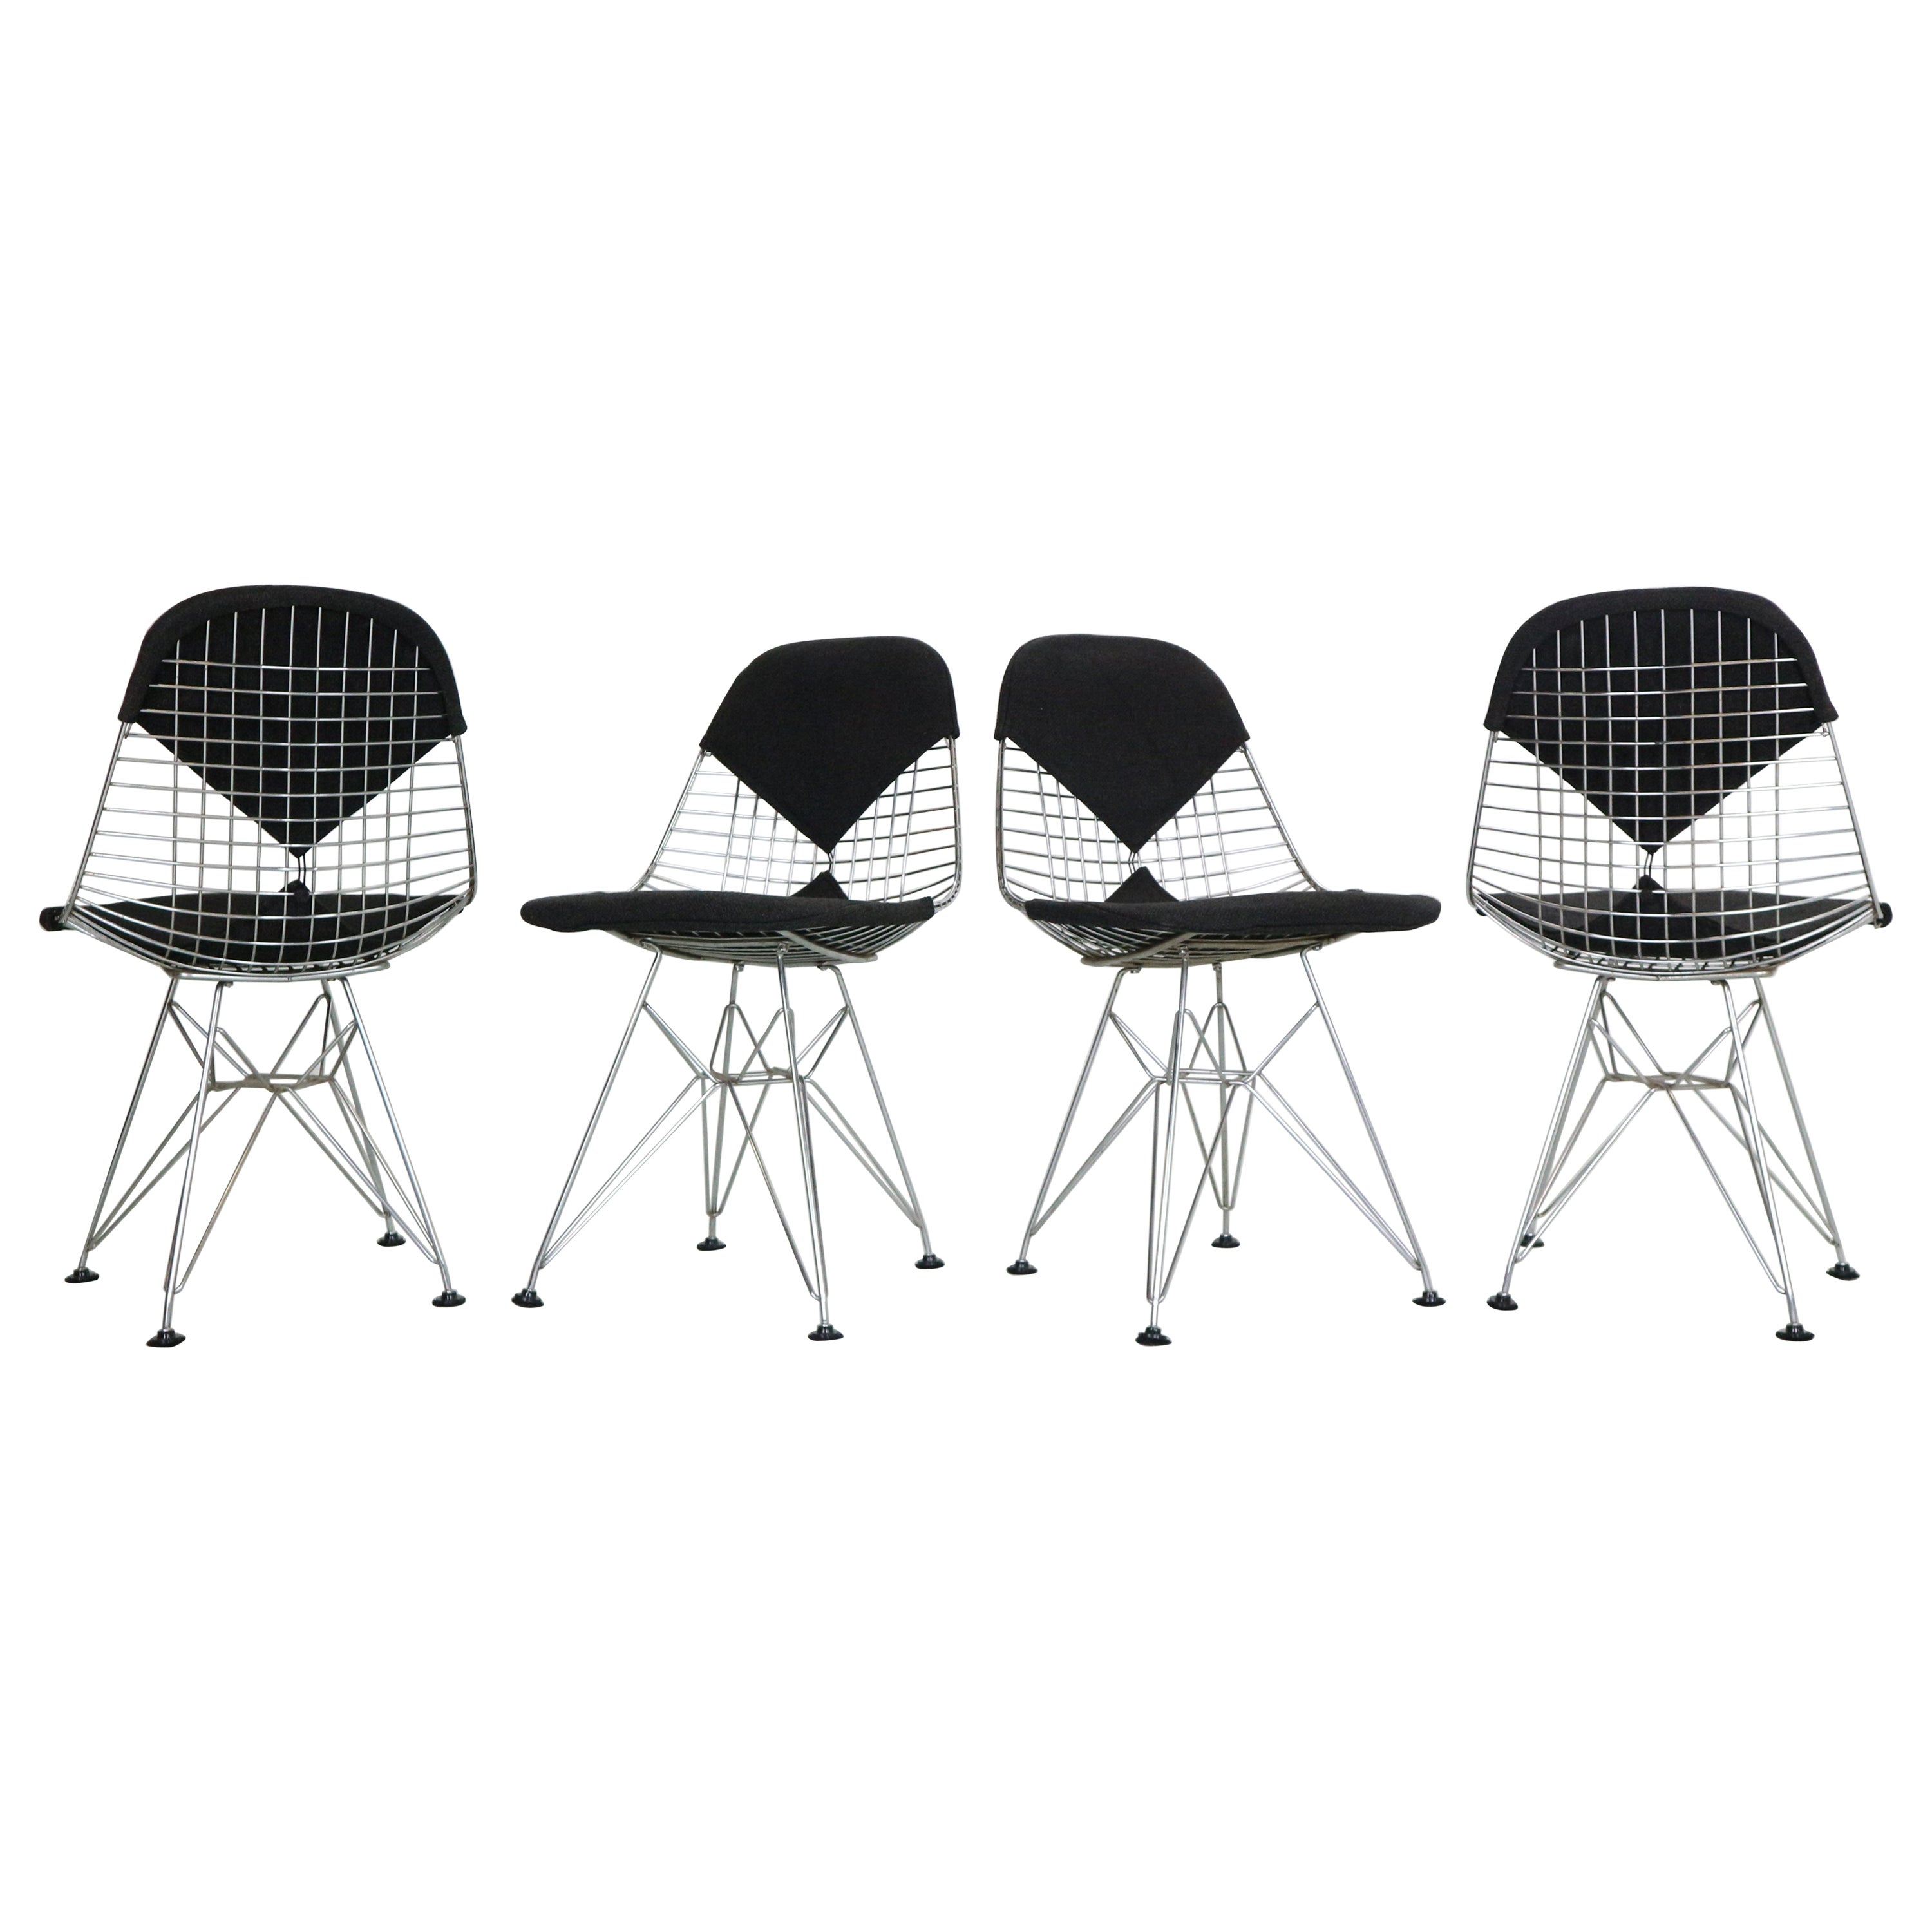 "DKR-2" Set of 4 Wire Chairs 'Bikini' by Eames for Herman Miller, 1960